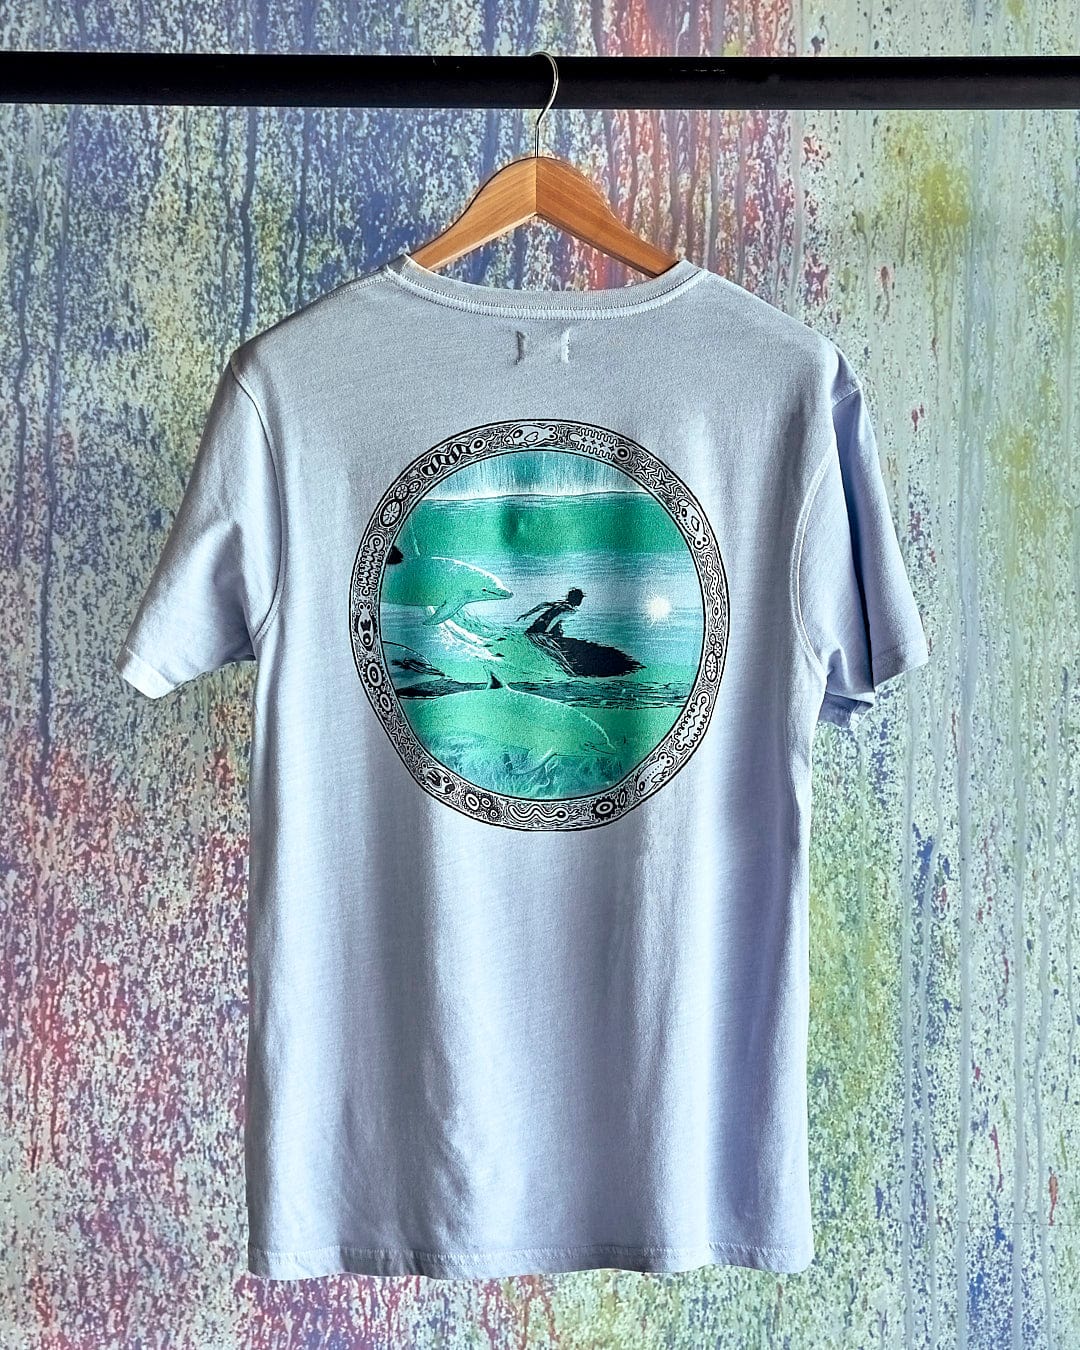 A Dolphin - Limited Edition 35 Years T-Shirt with an image of a surfer on it. (Saltrock)